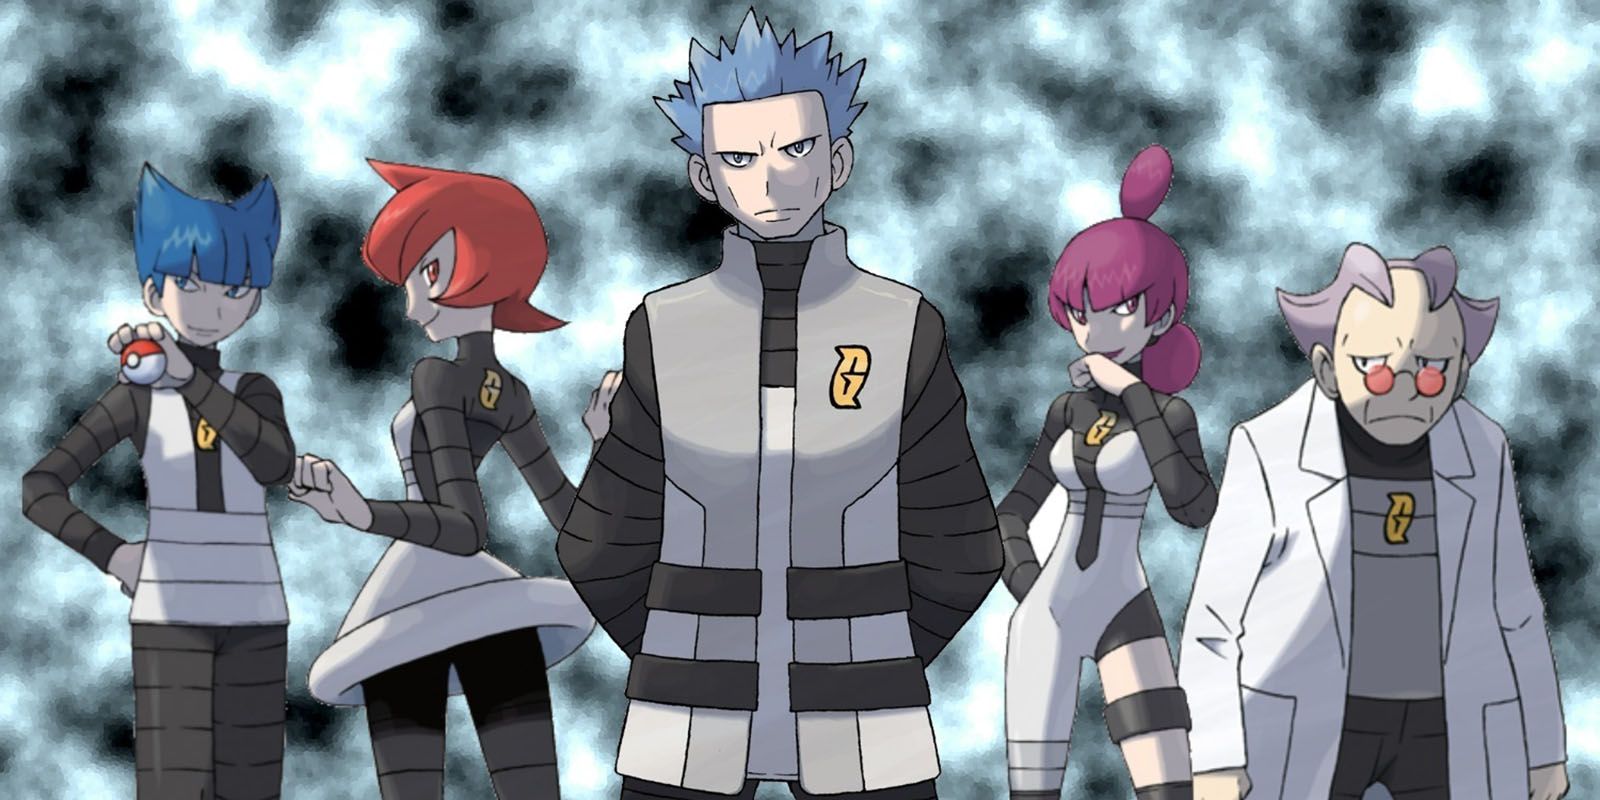 Team Galactic standing in front of a cloudy gray background